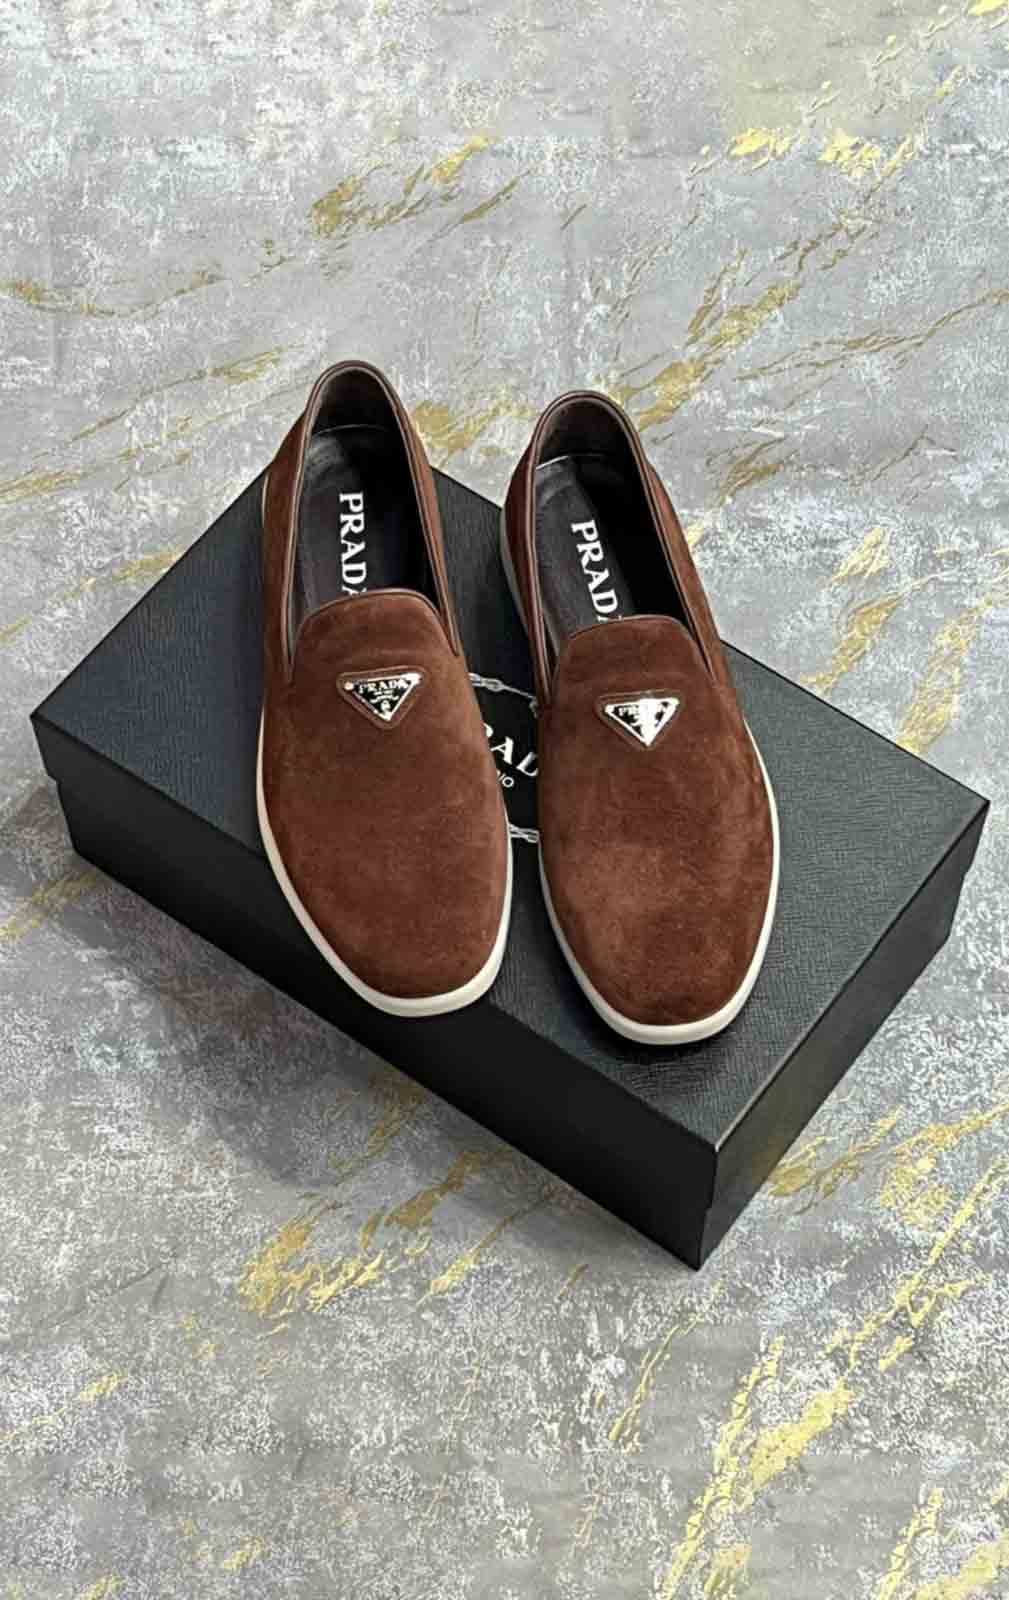 Suede Leather Loafers Prada-PD-R-57